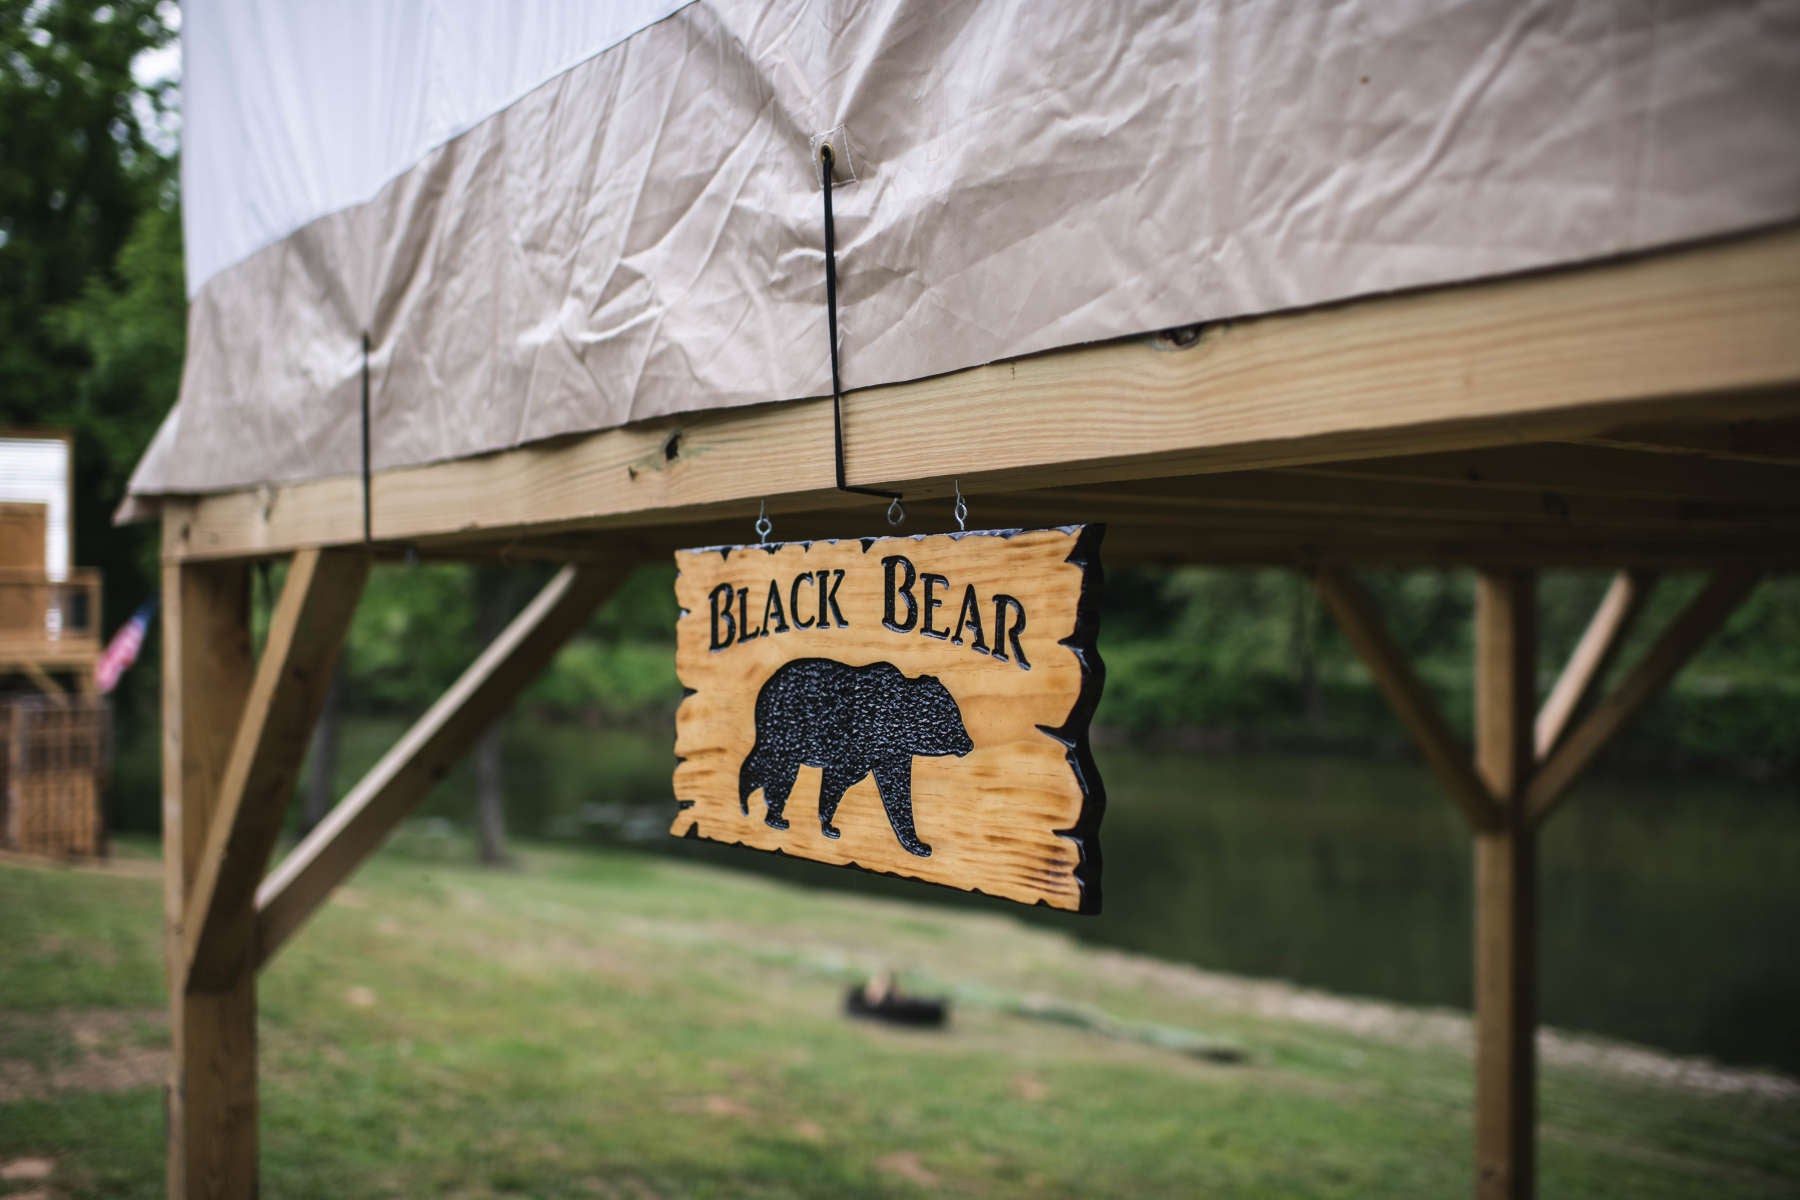 Each tent with unique names. The Black Bear, The Gamecock, The Panther, The Yellow Jacket, and The White Tail.